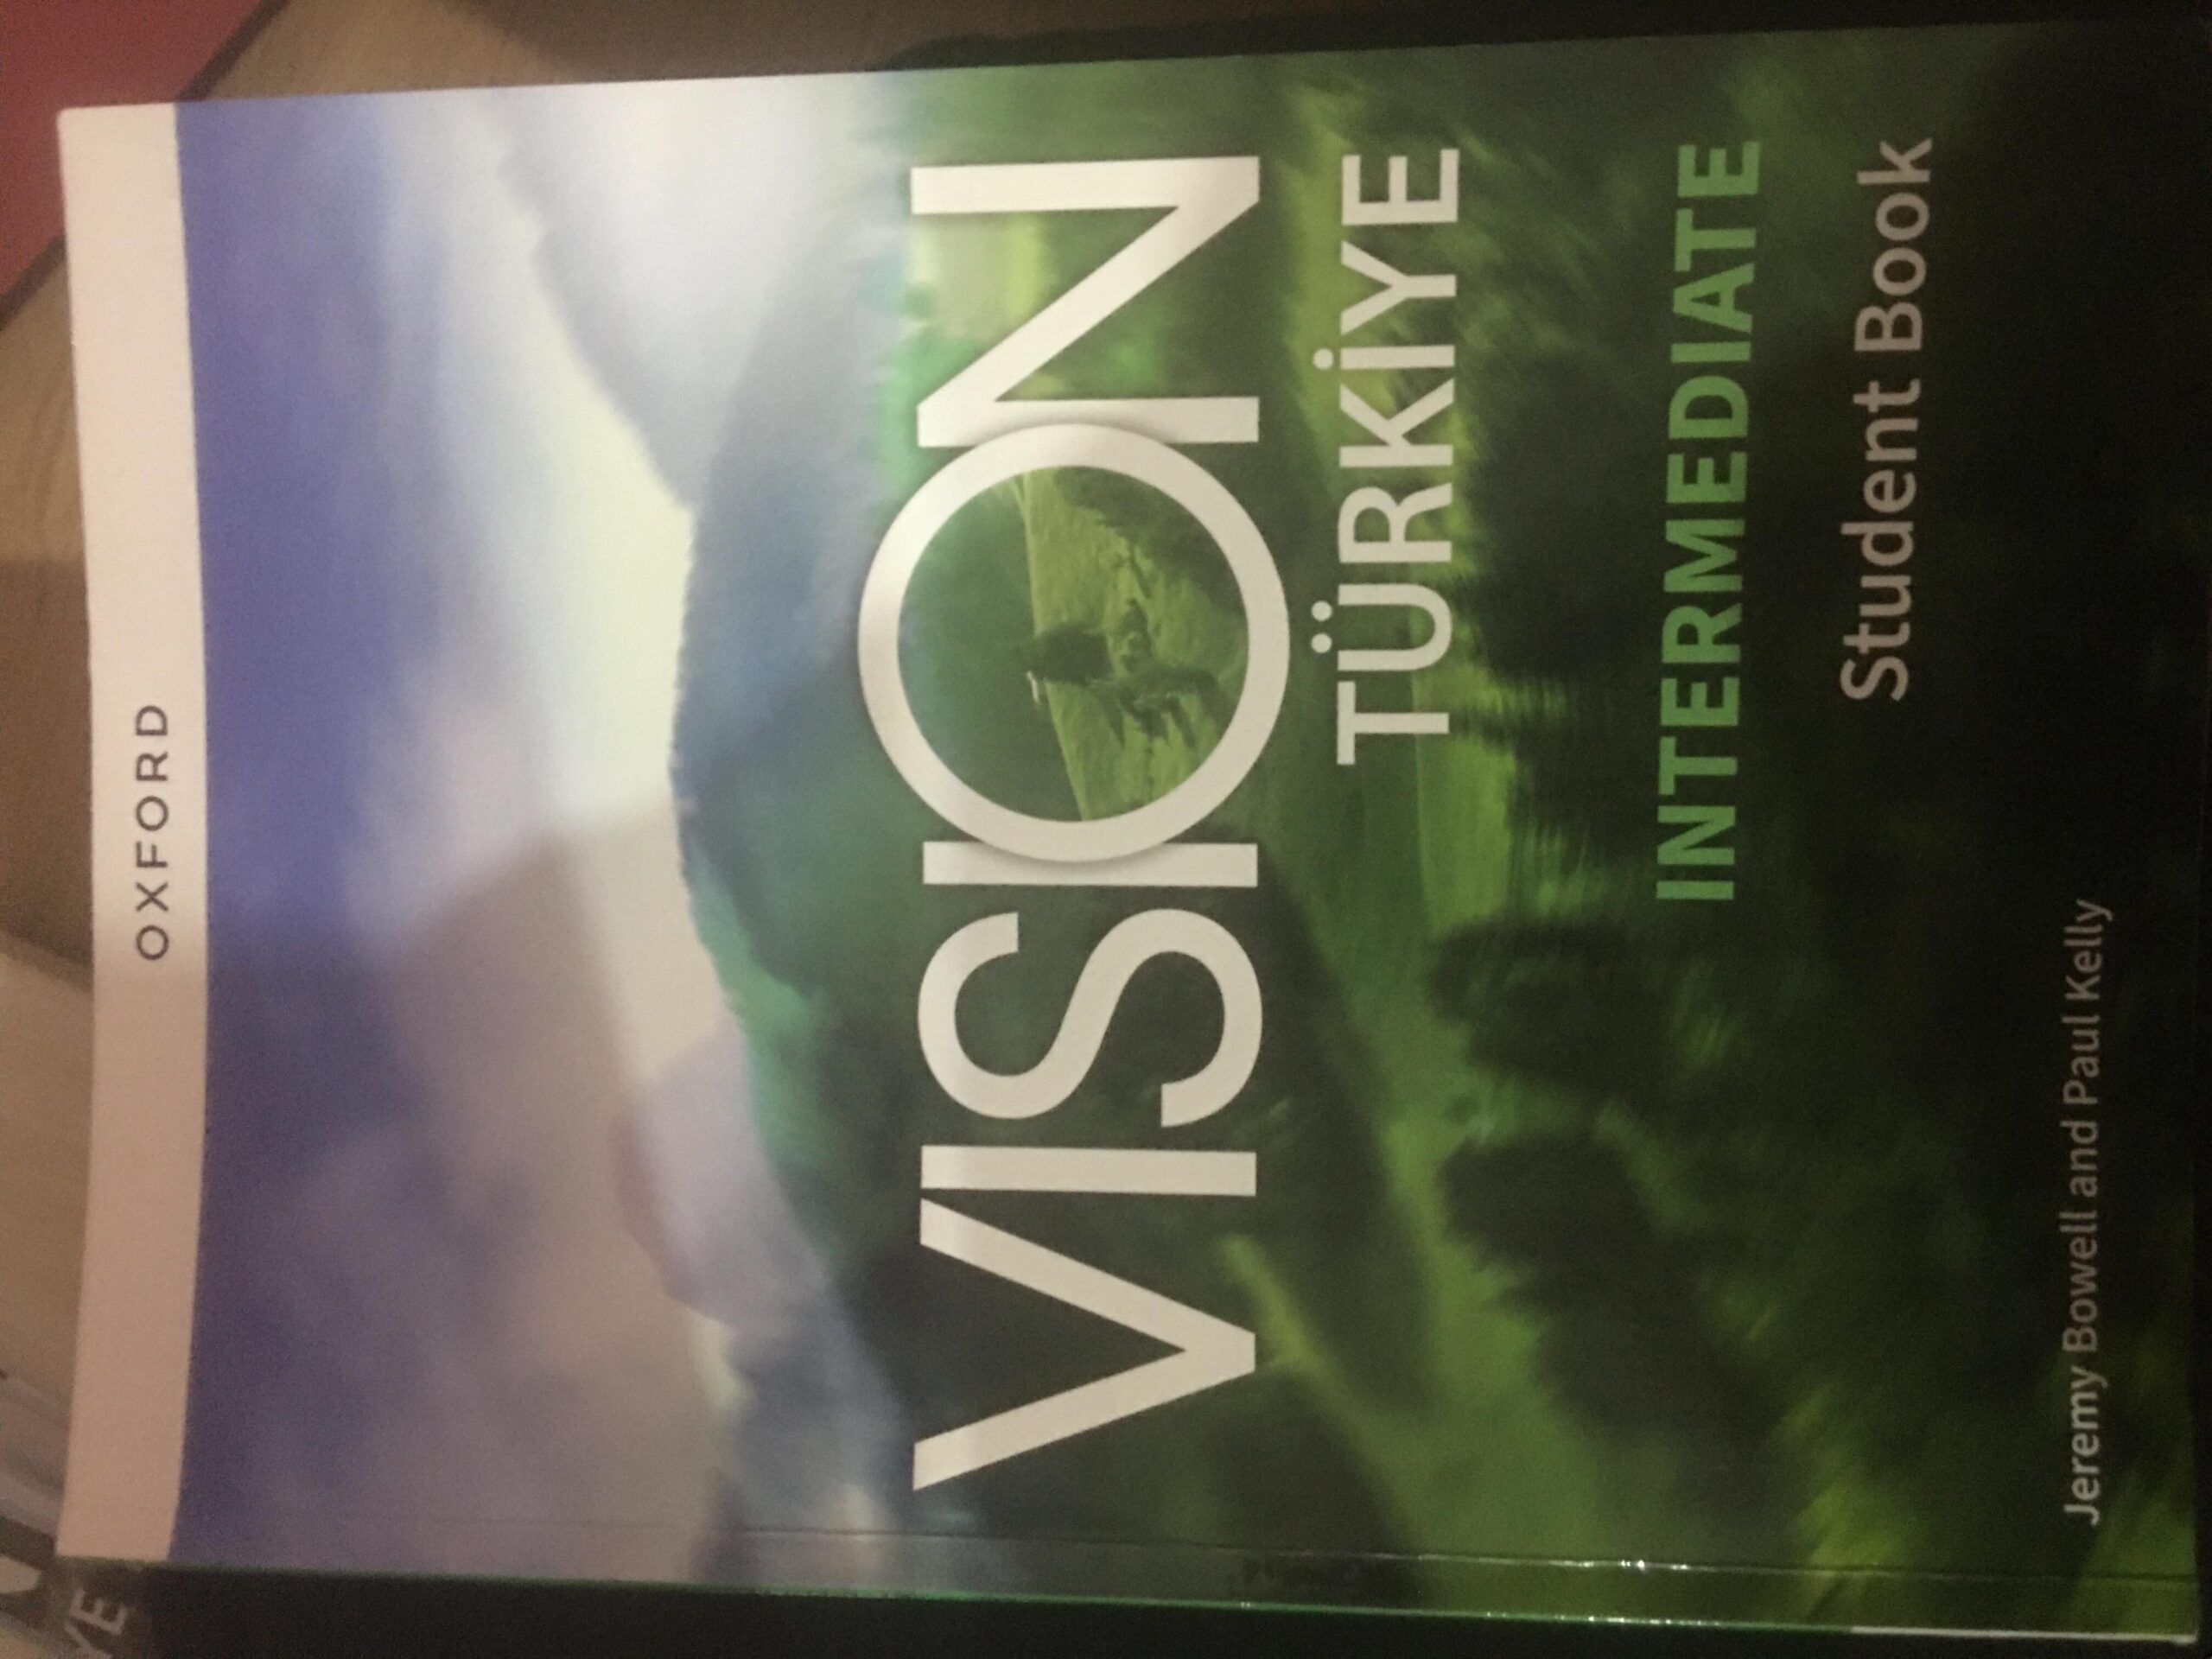 Oxford vision student and workbook